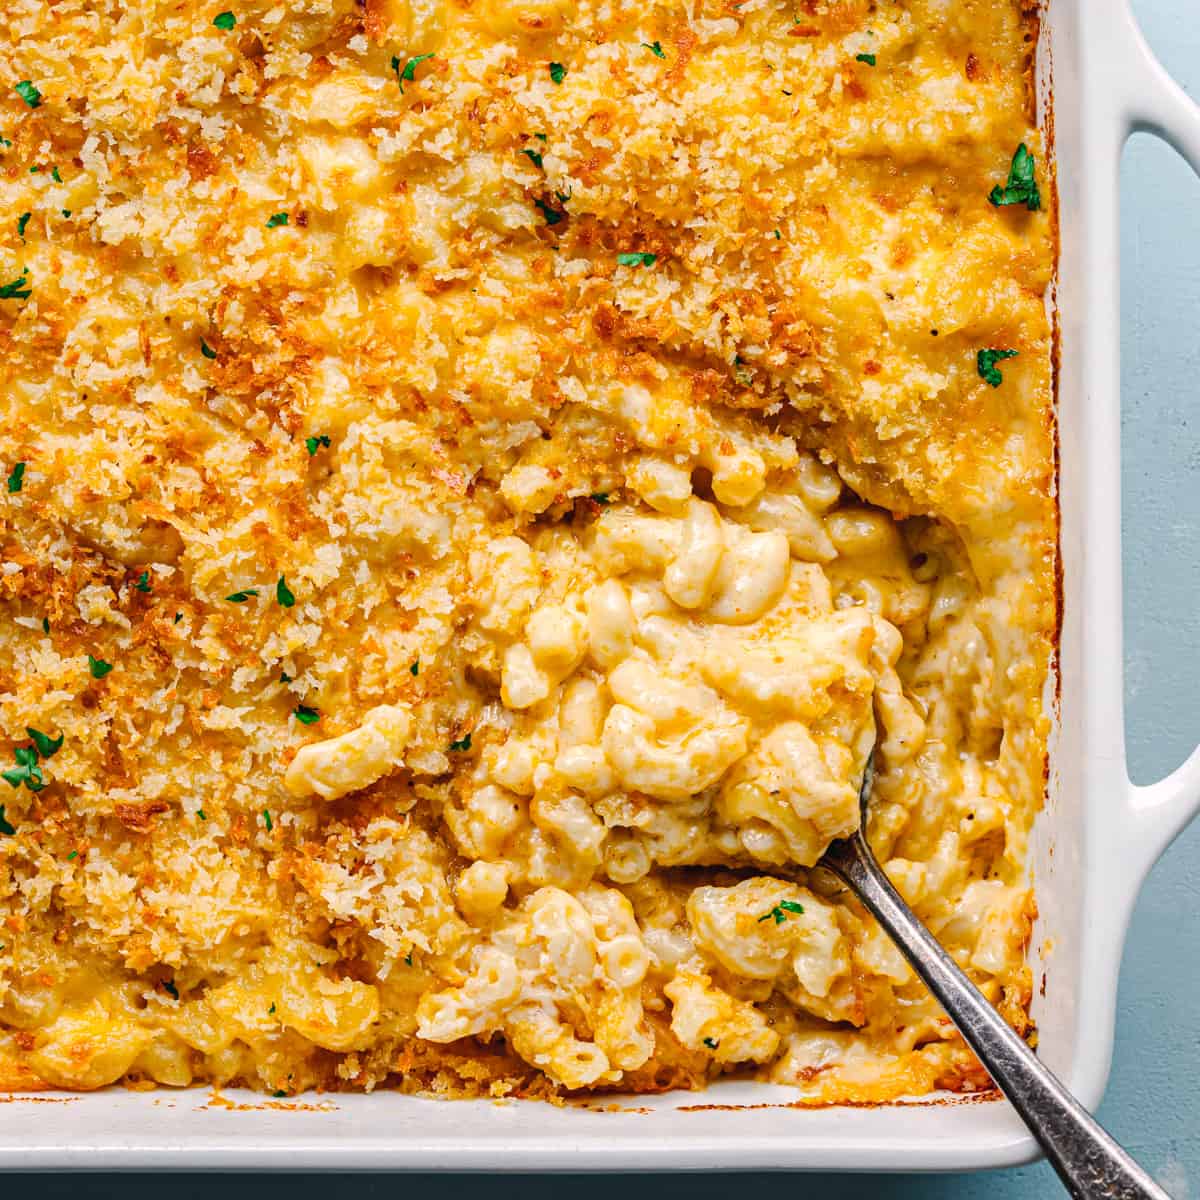 Baked Mac and Cheese (So Creamy and Cheesy)